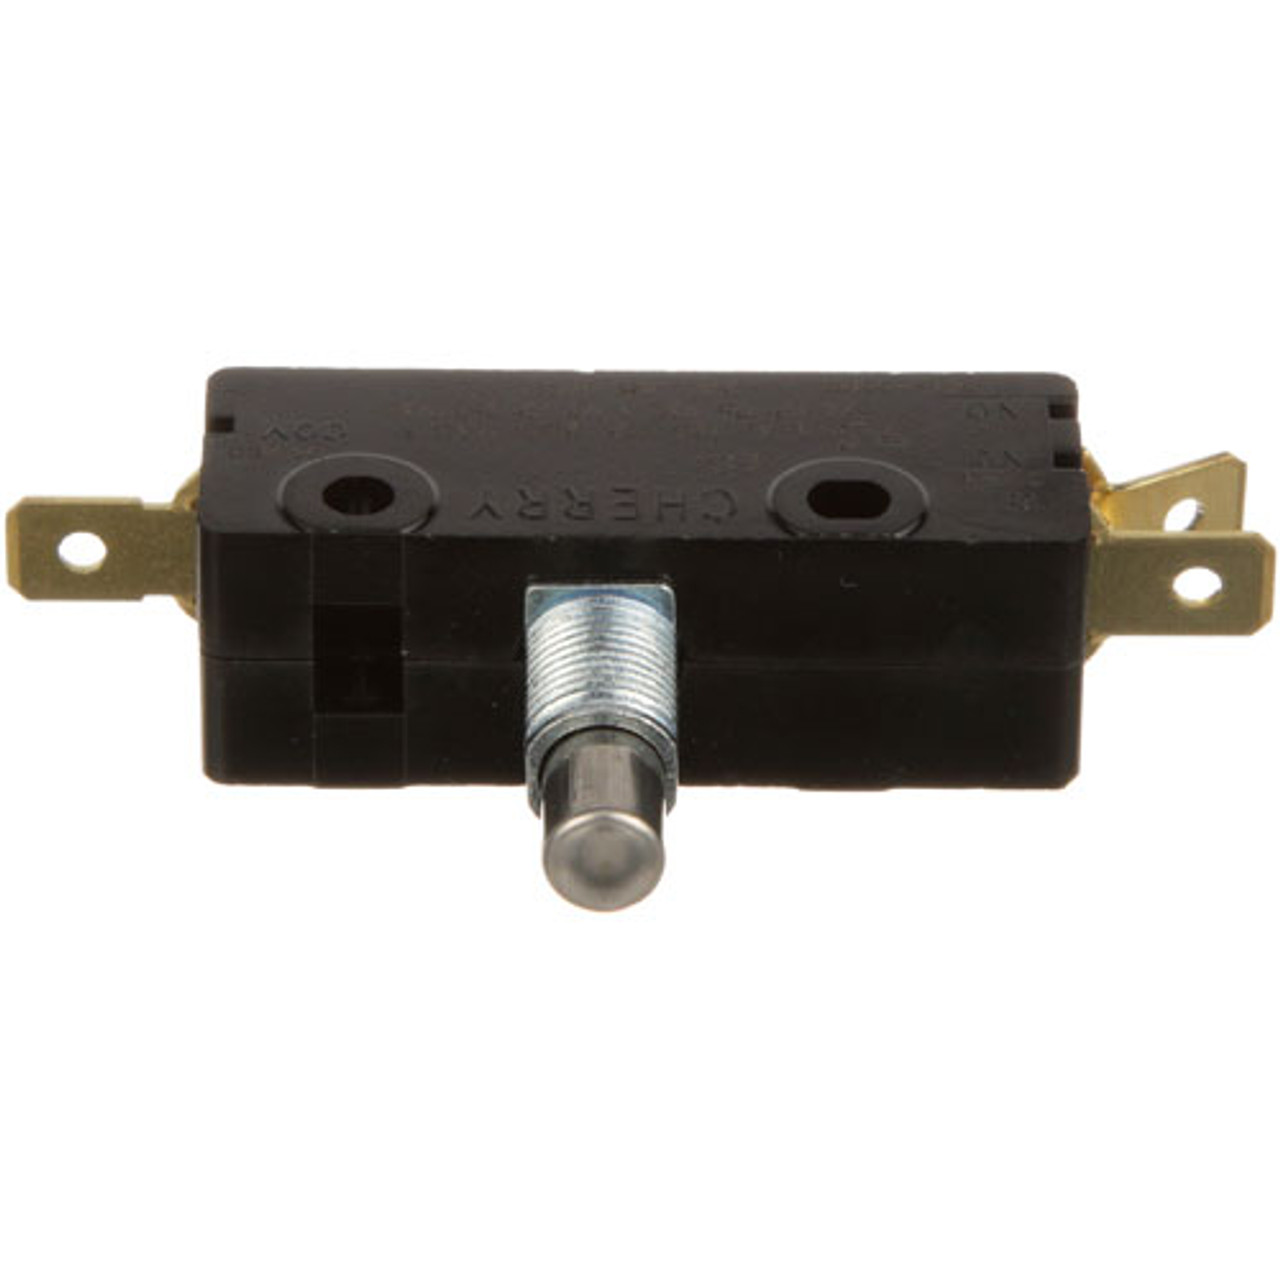 Switch - Replacement Part For Southbend SOU1172768